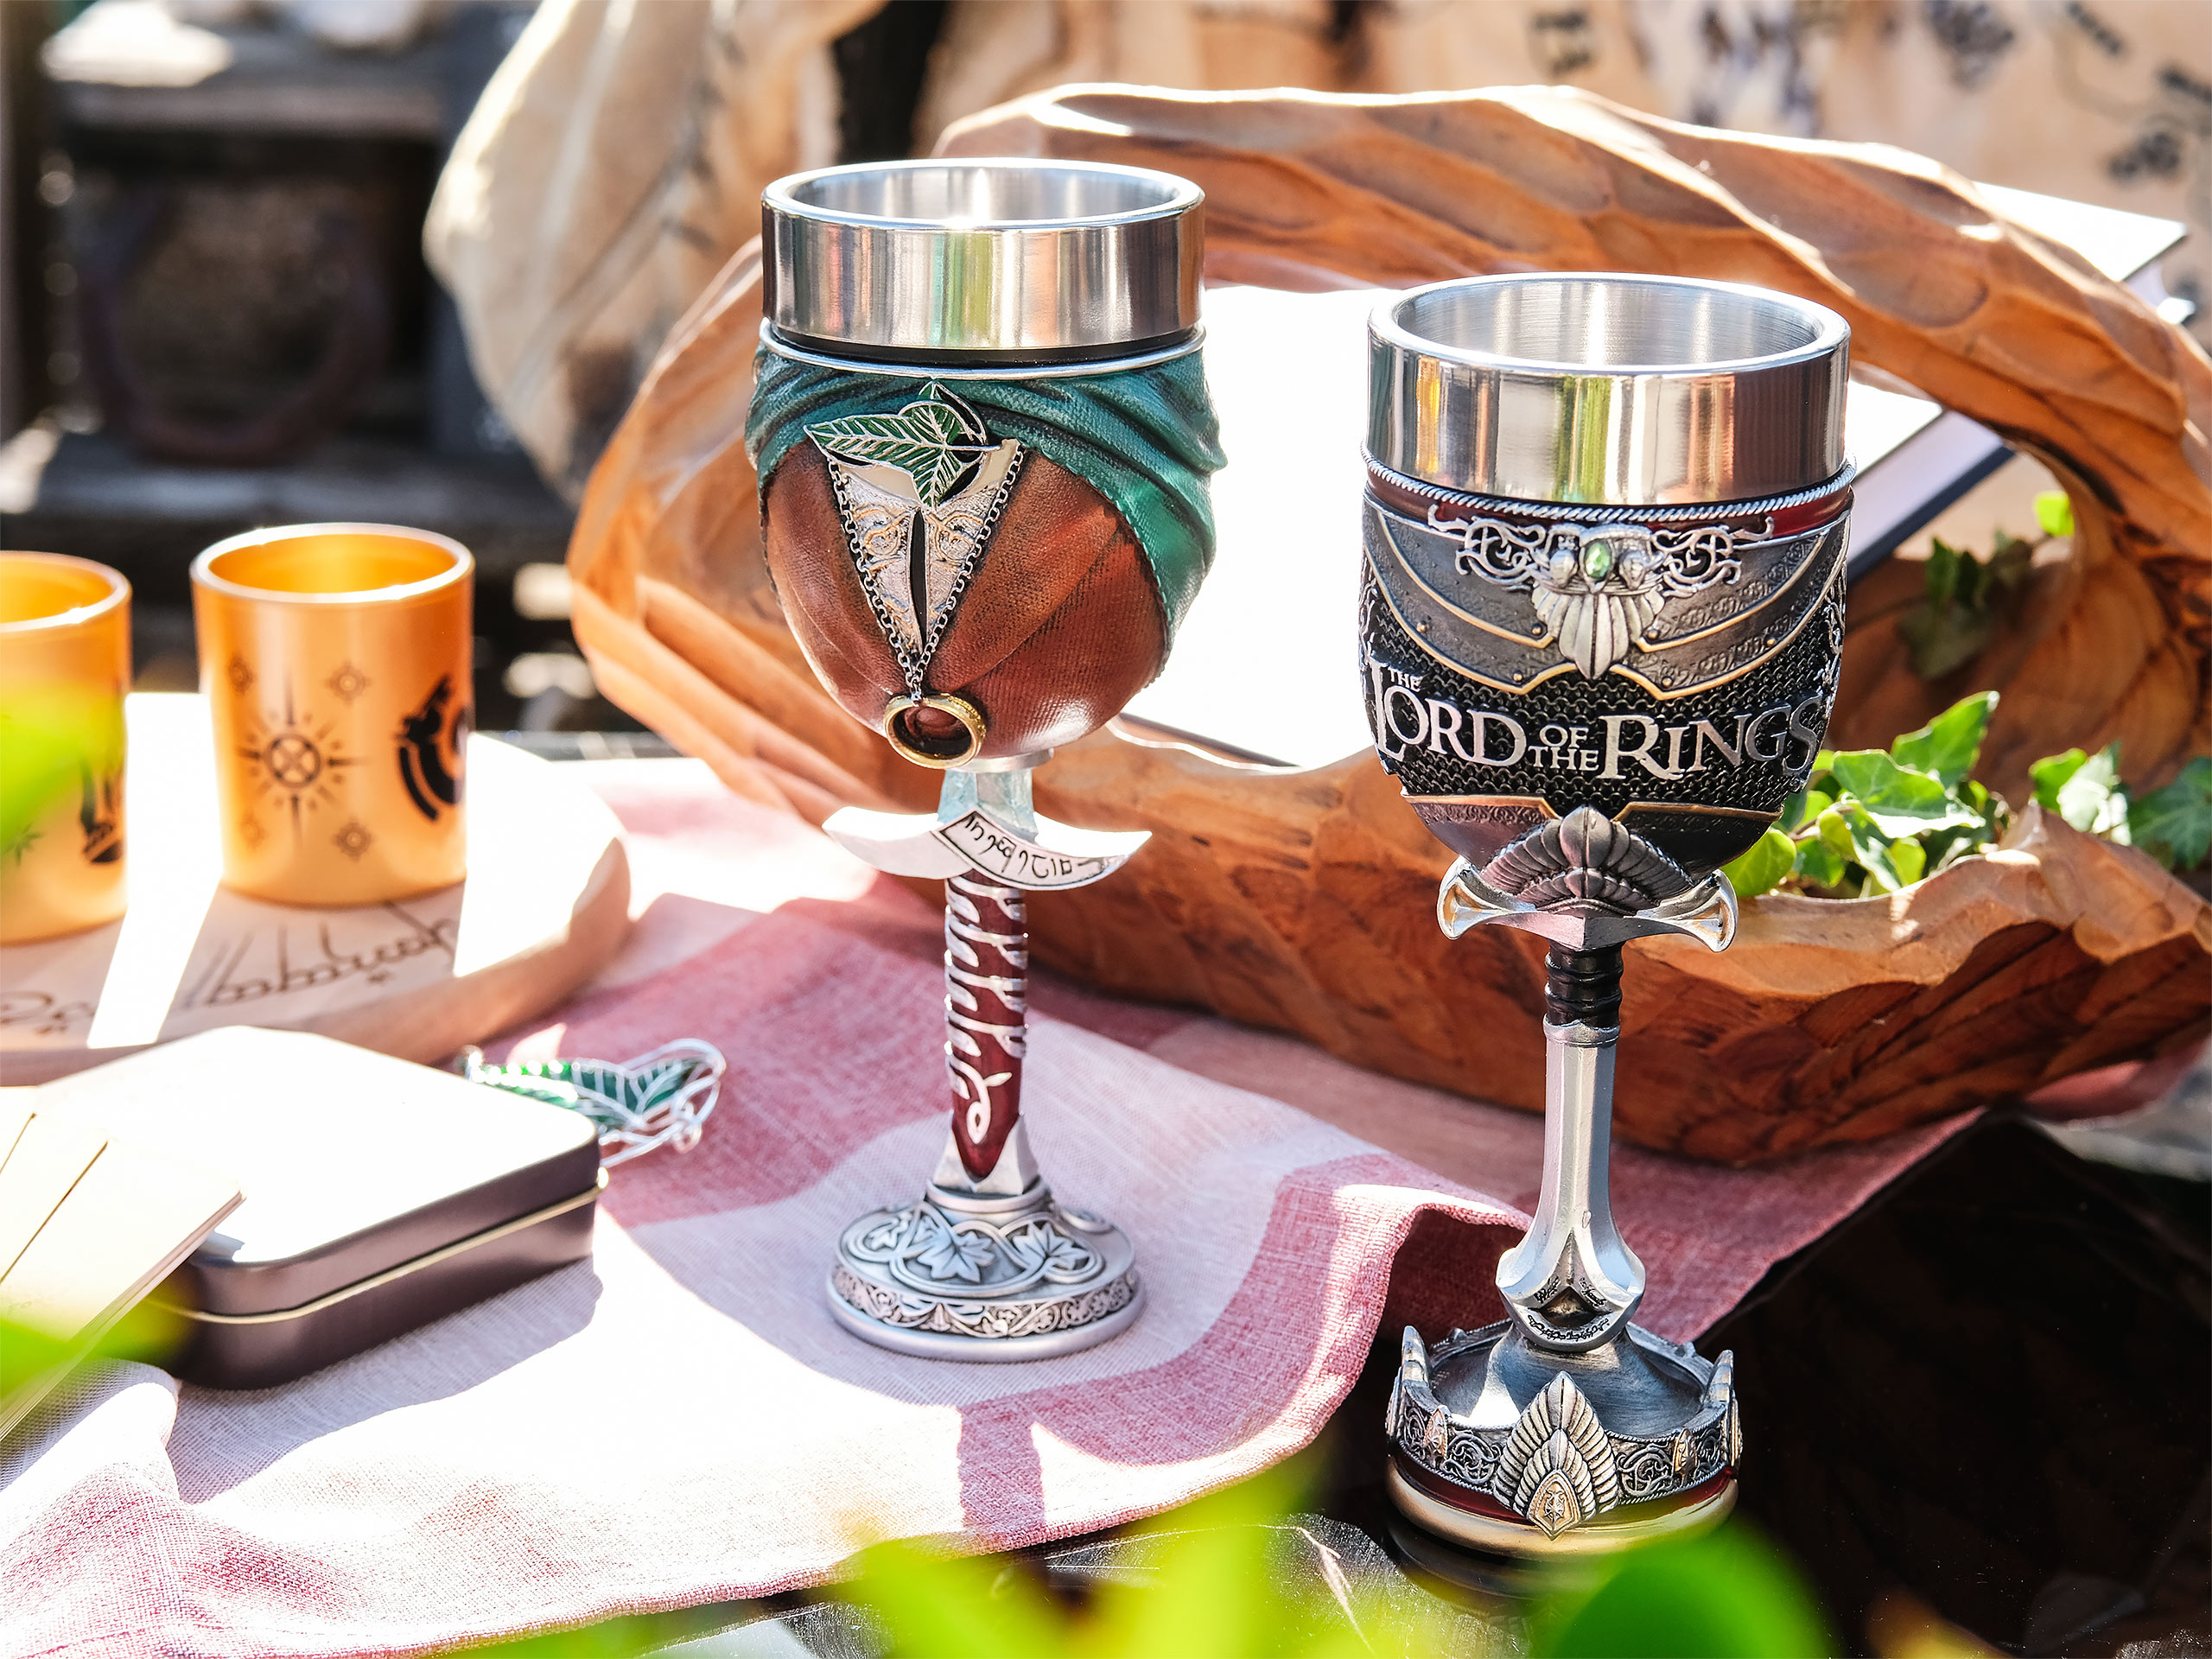 Lord of the Rings - Aragorn Deluxe Goblet